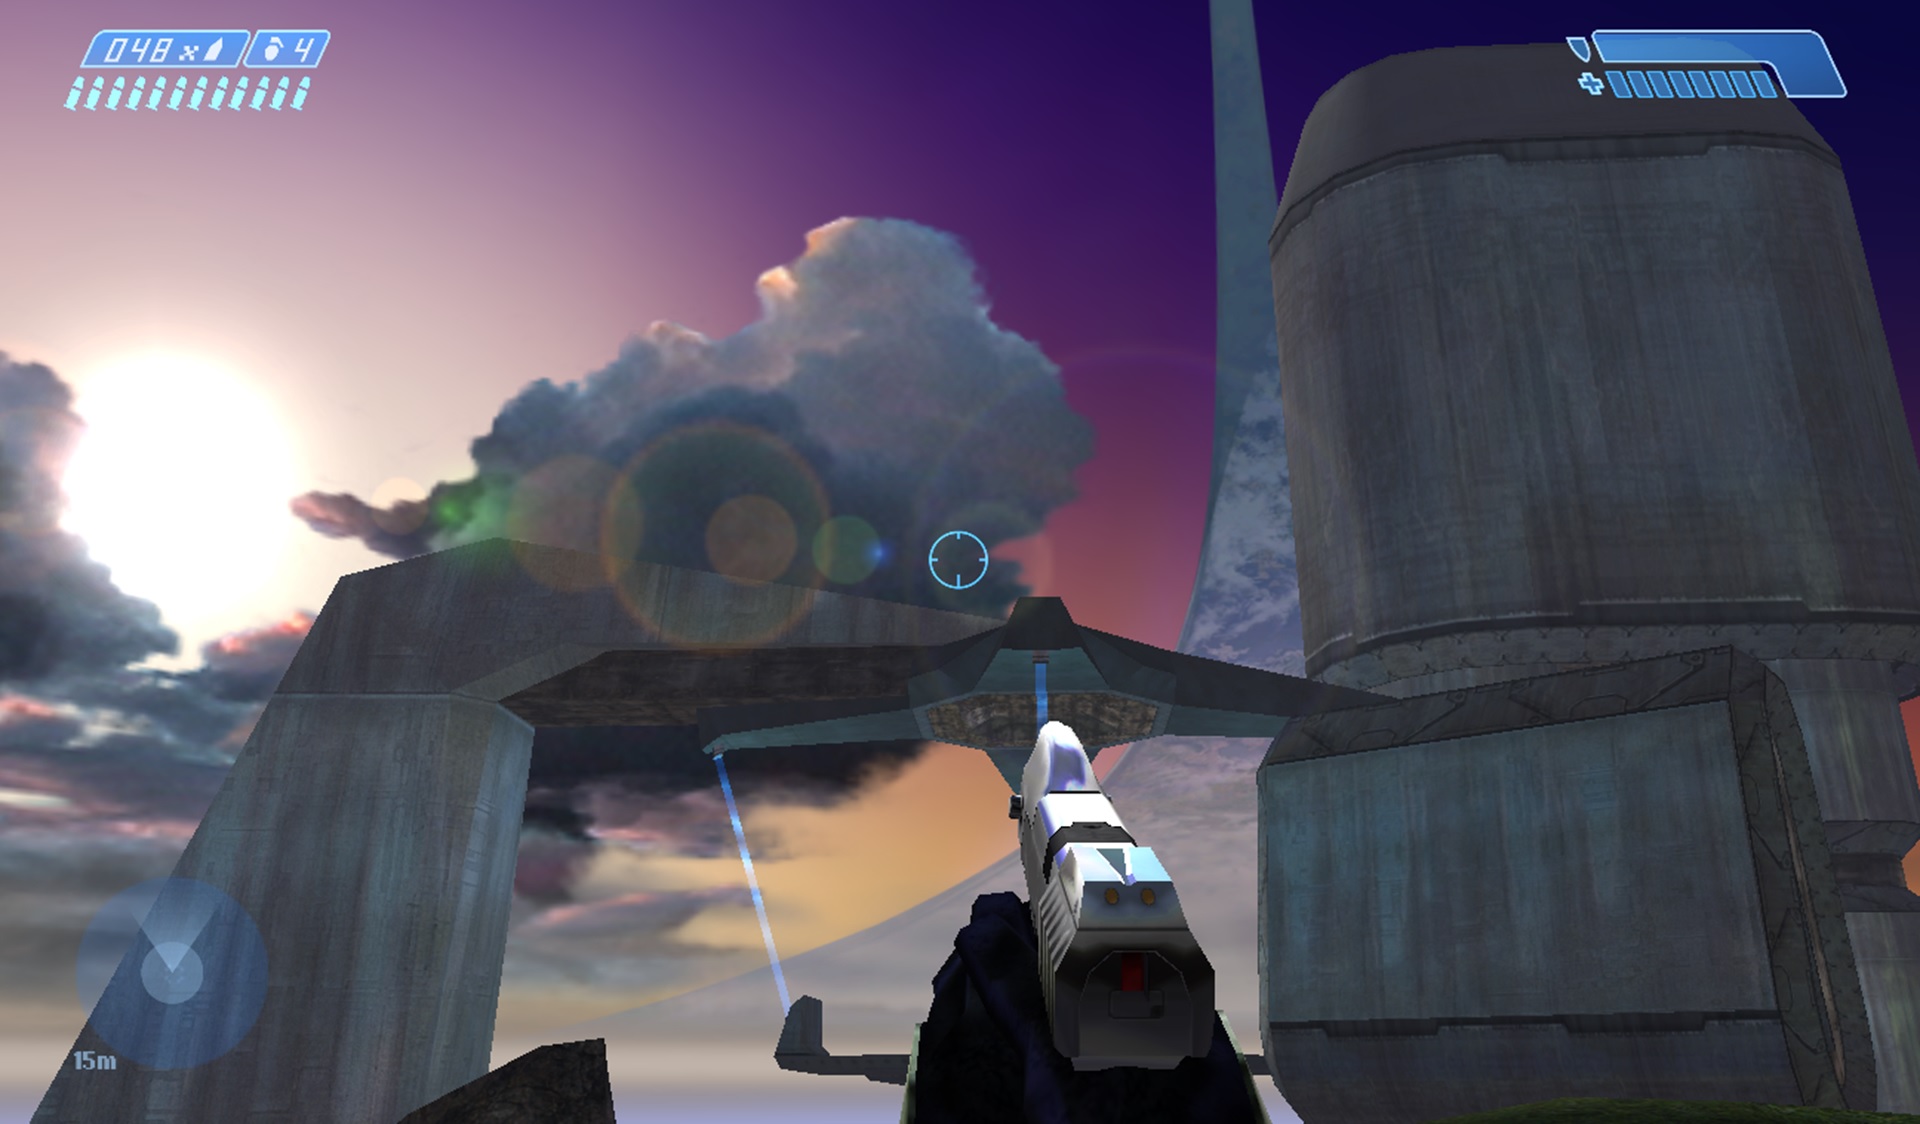 Digsite screenshot of Abyss while work-in-progress to show the E3 2000 skybox